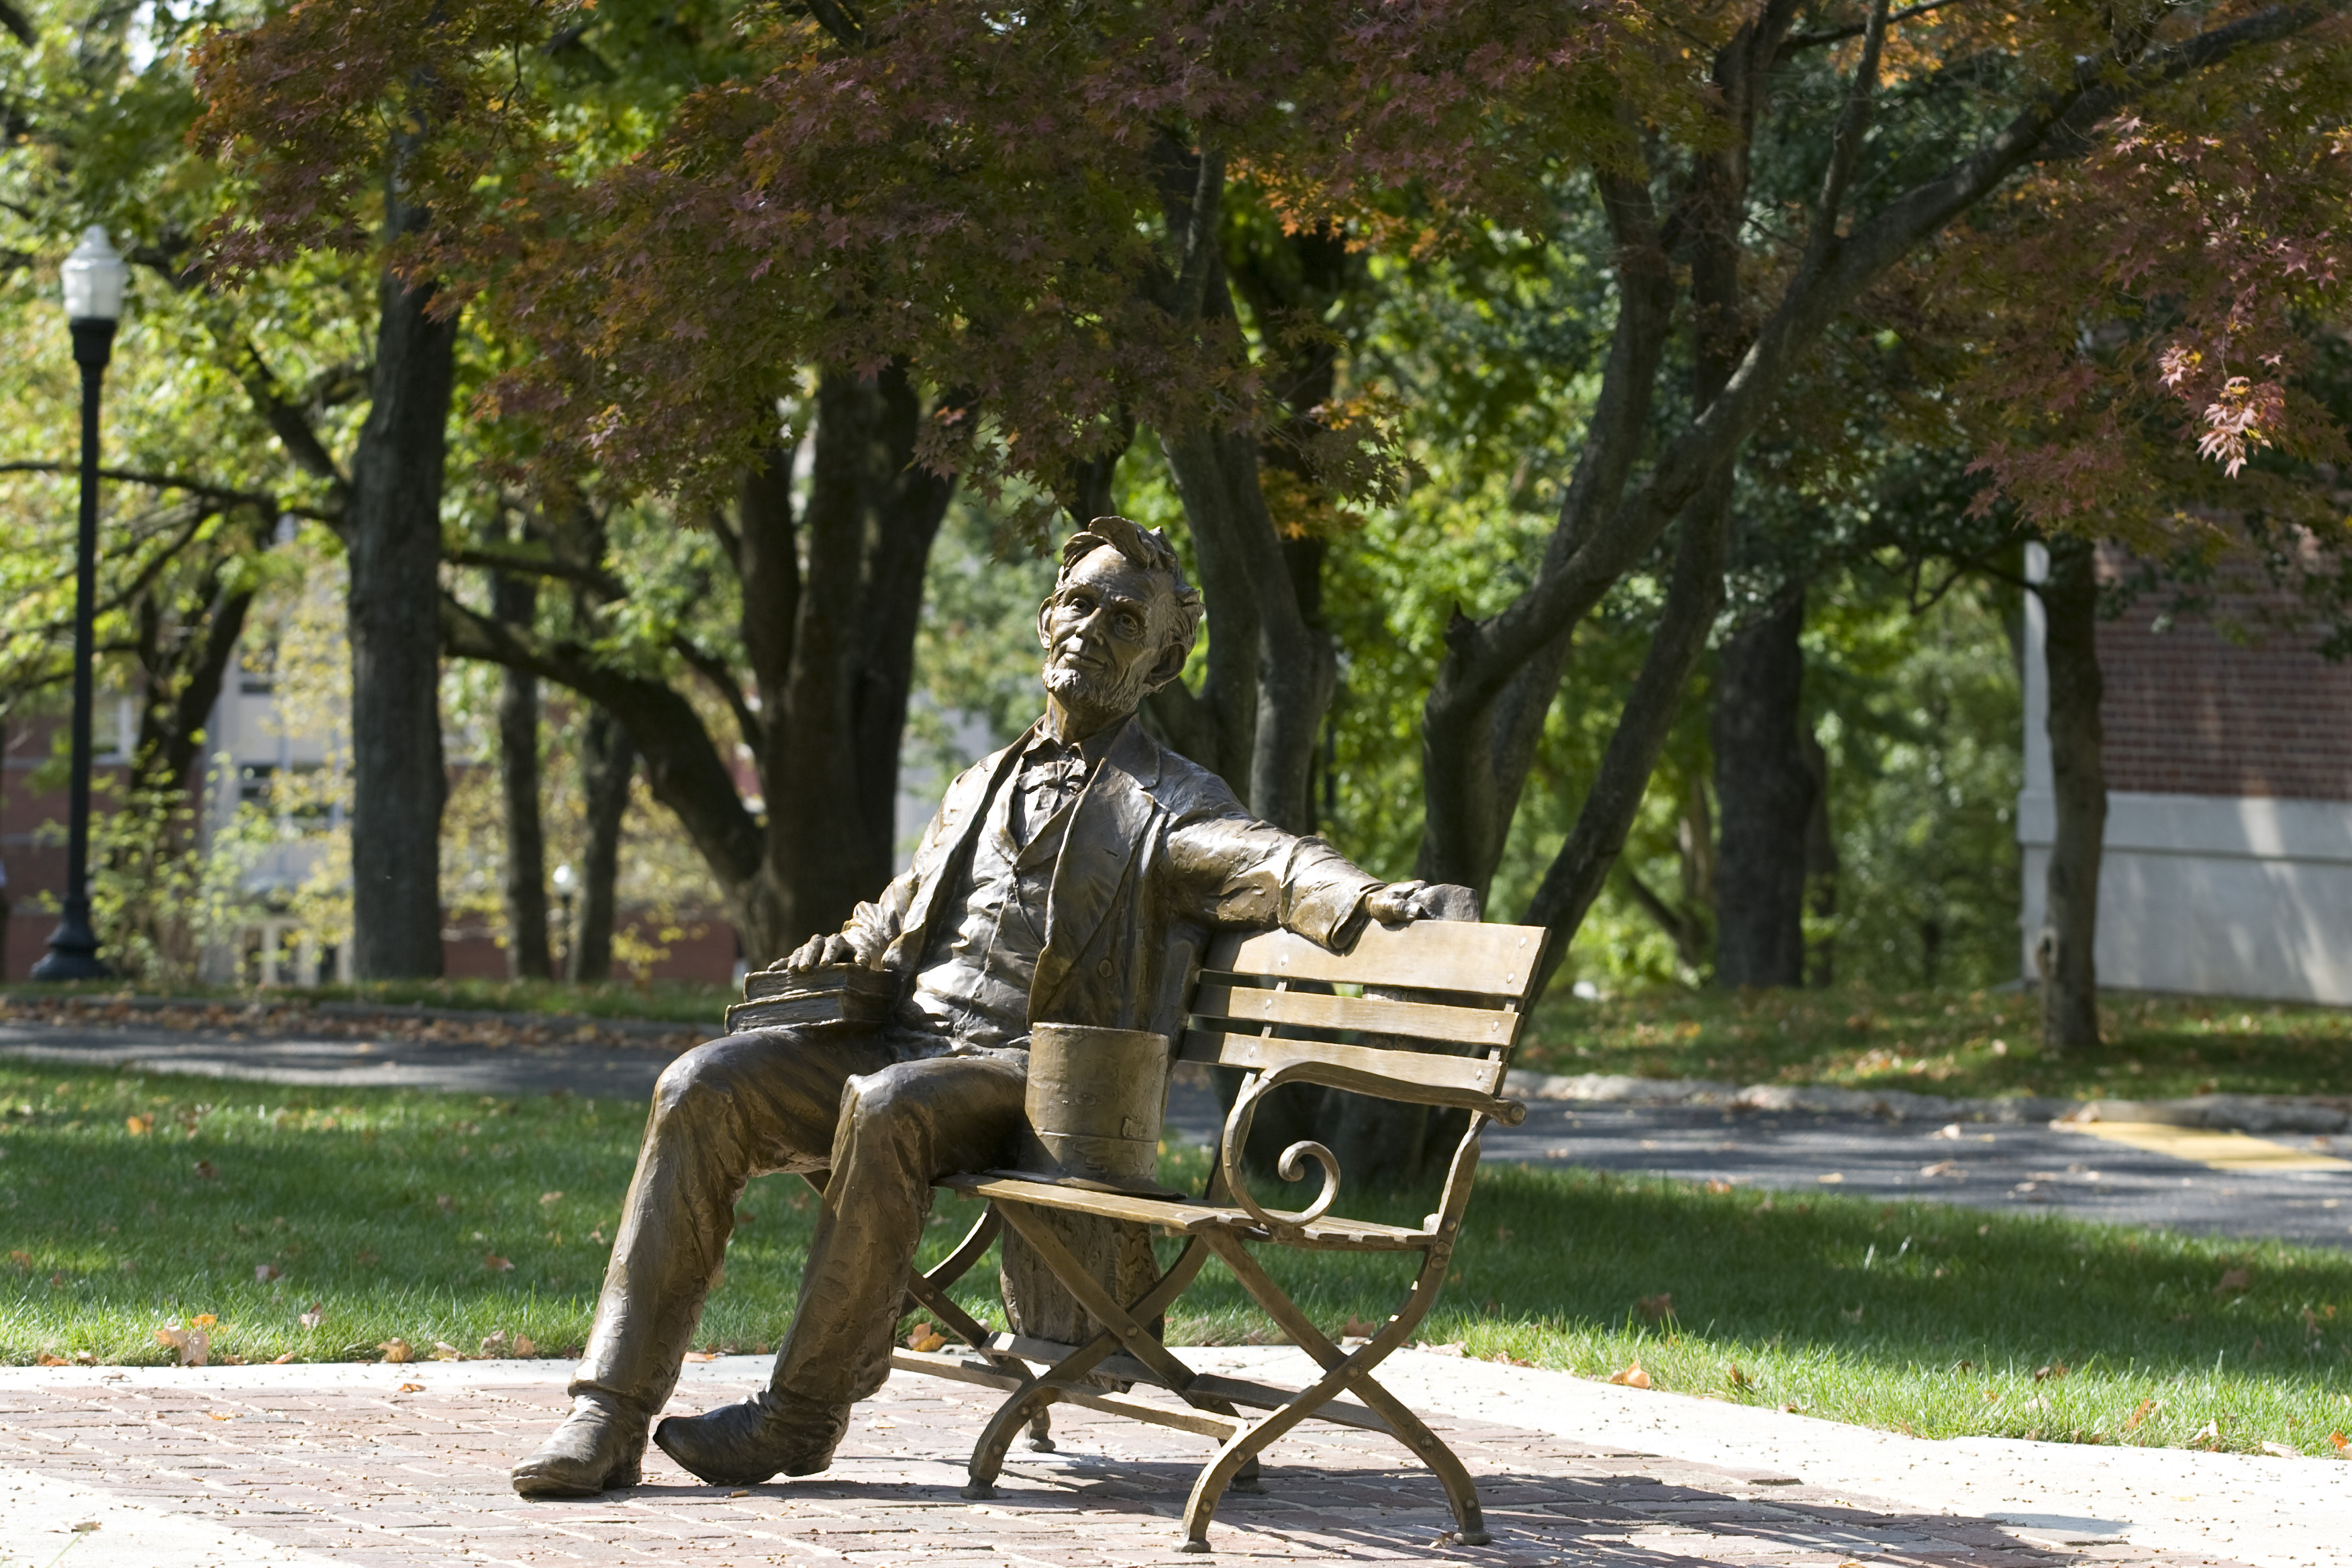 State of Abe Lincoln on Bench